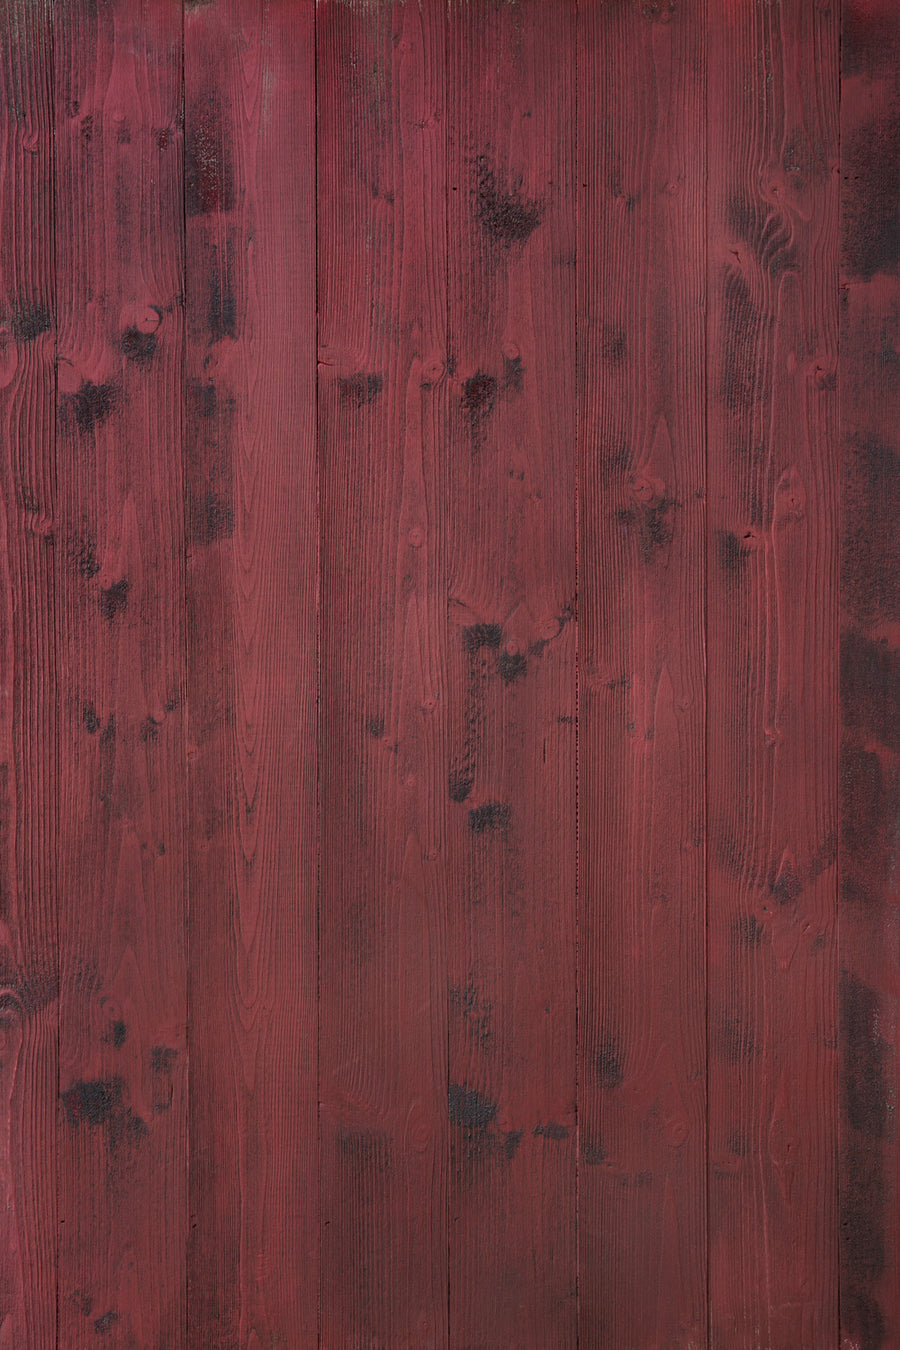 Dark red wood photography surface